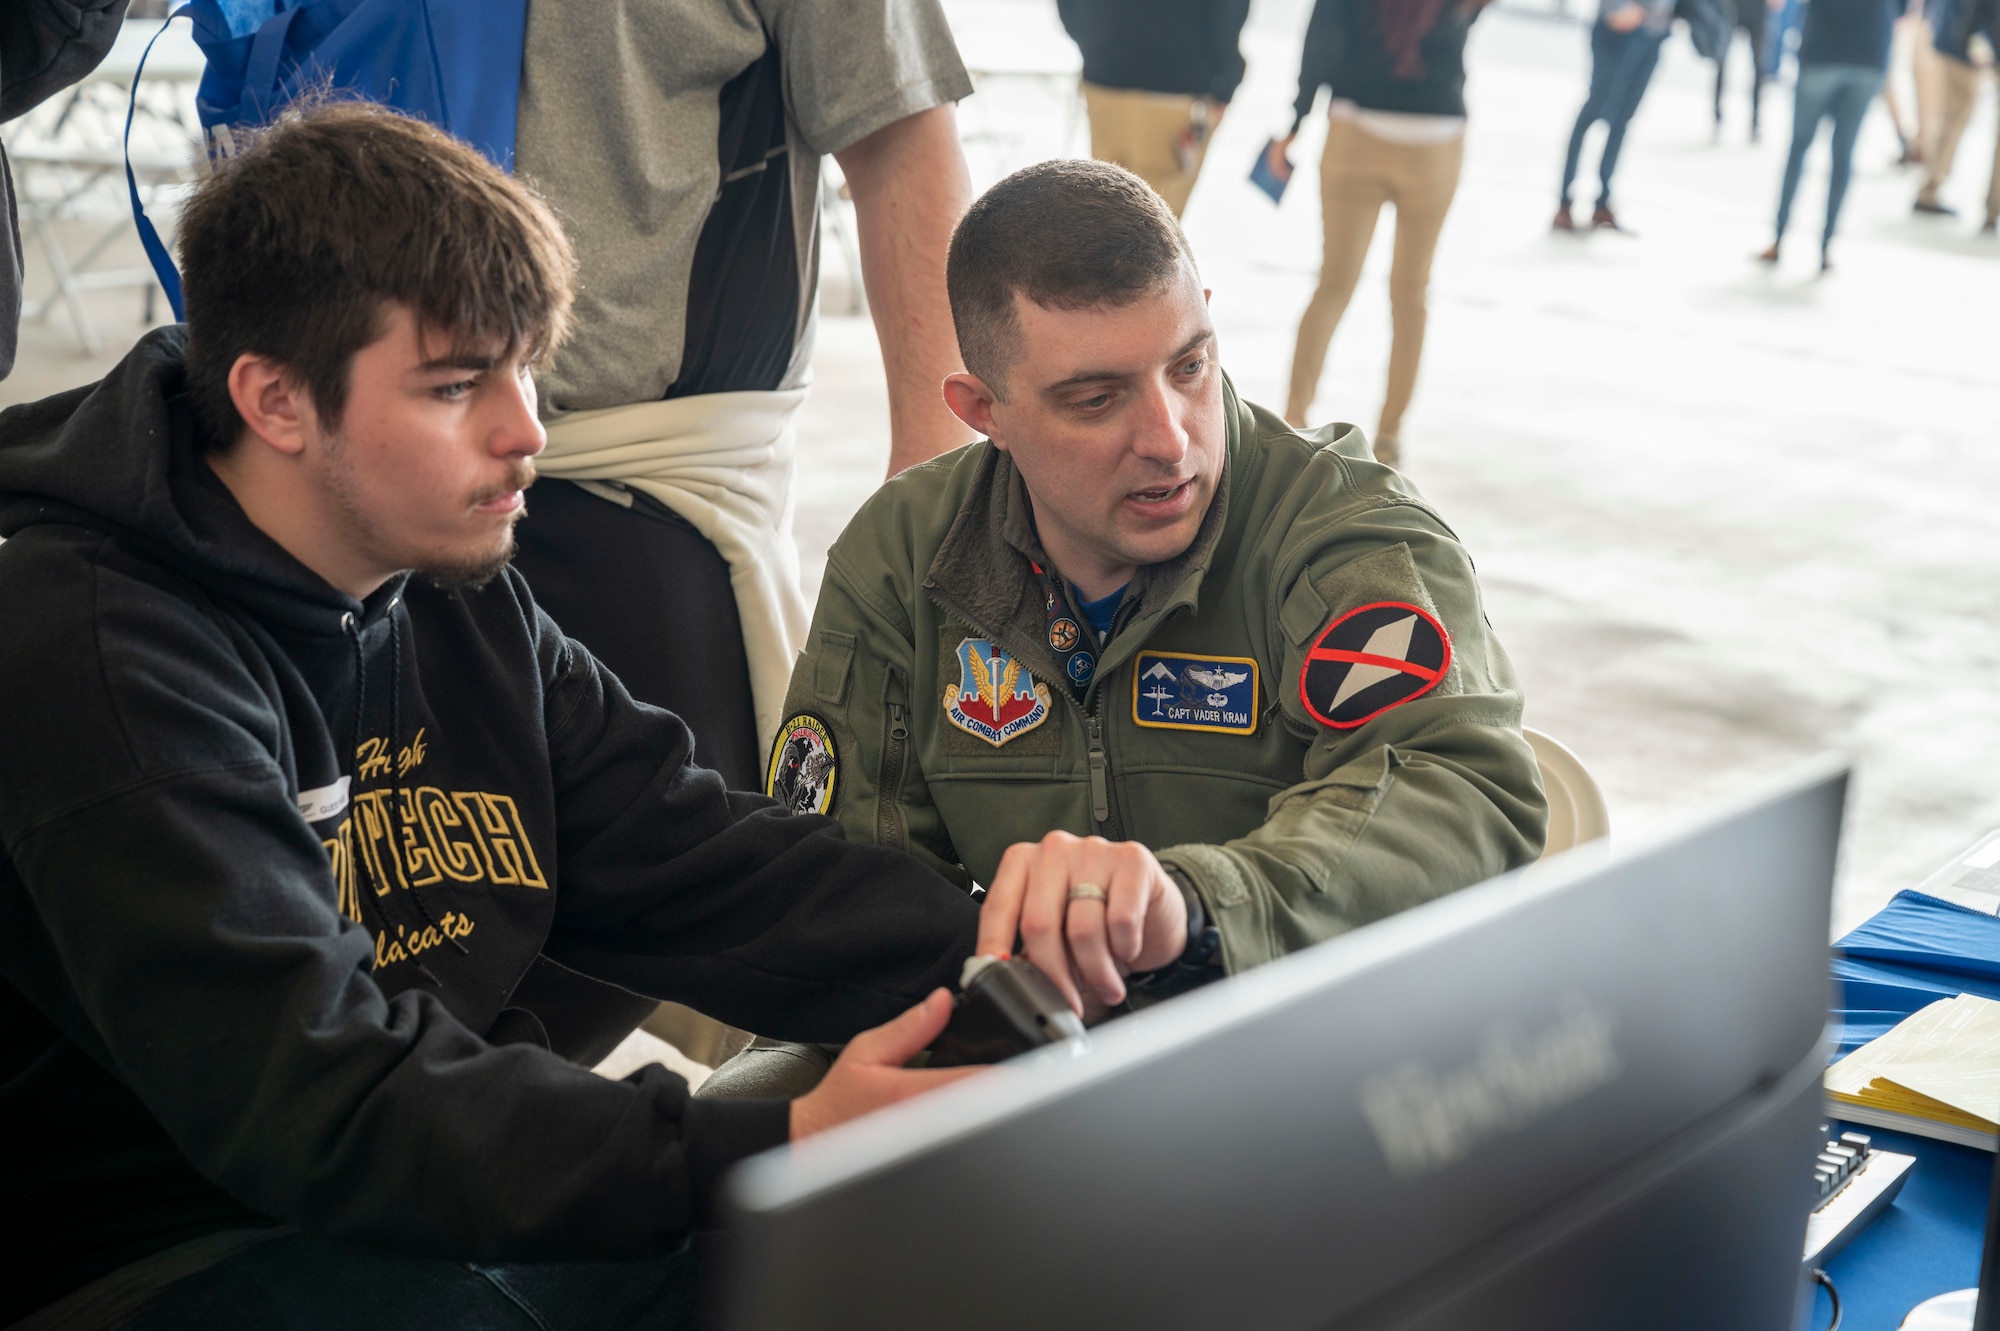 Capt. Benjamin "Vader" Kram, 31st Test and Evaluation Squadron teaches a student about how to use the flight simulator at California Aeronautical University Aviation Career Day in Bakersfield, California, Feb. 3.